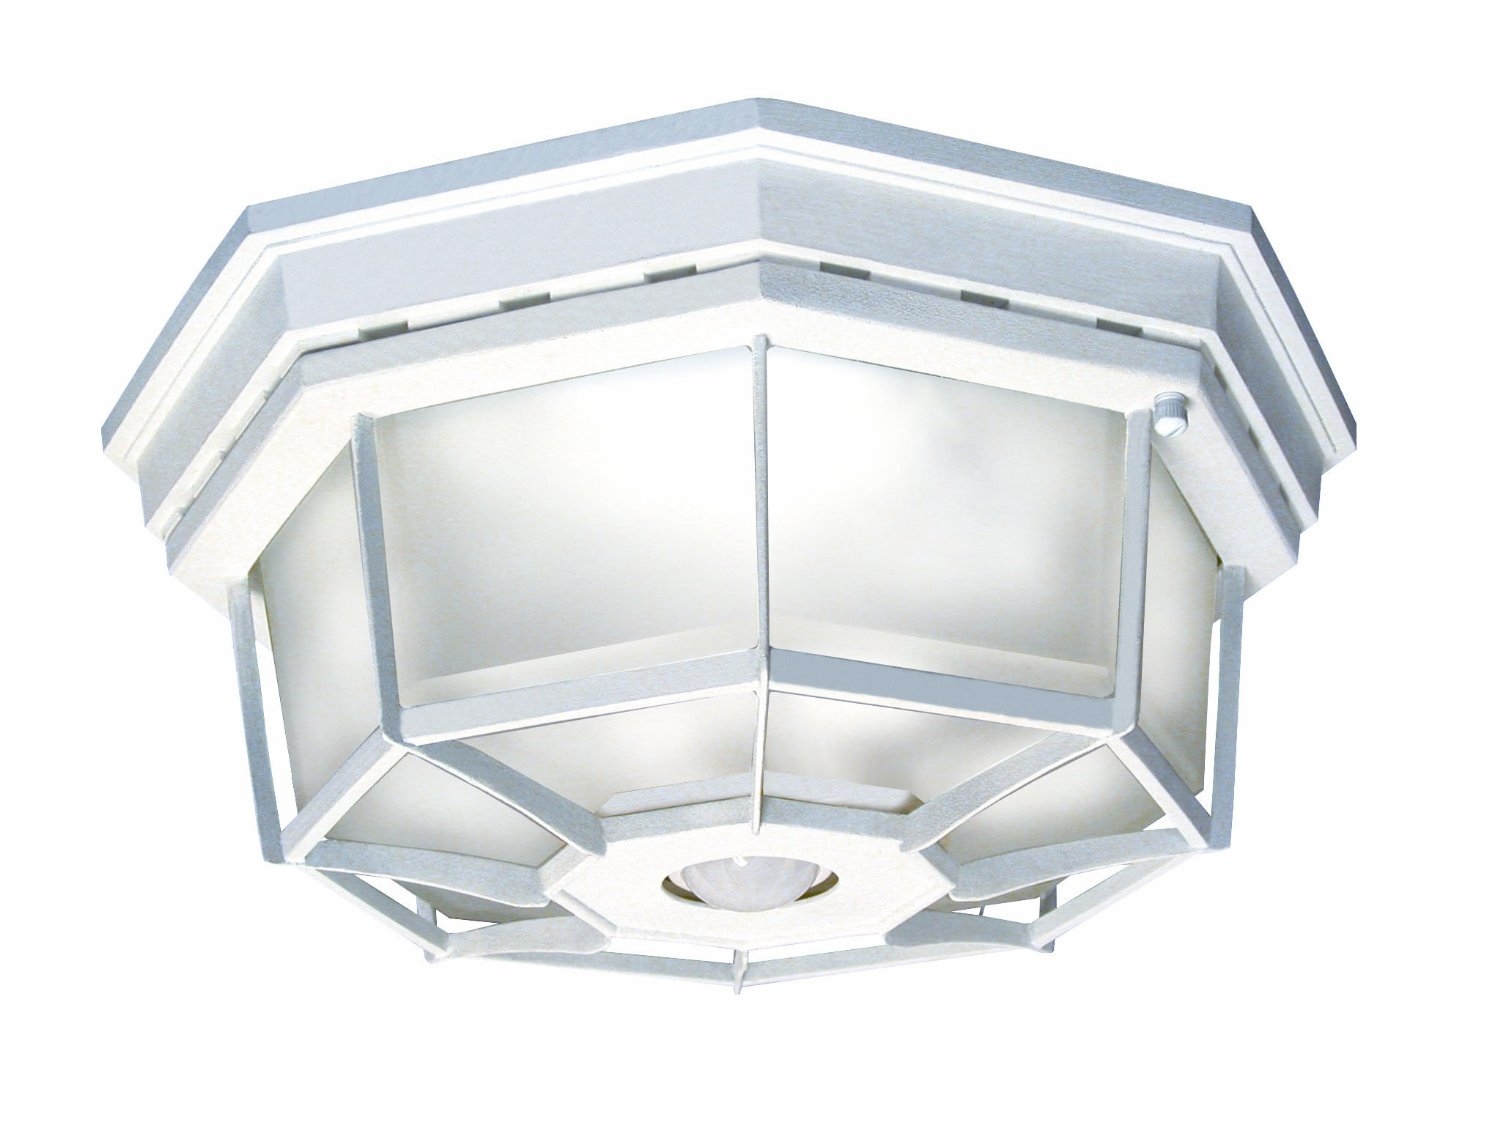 Permalink to Motion Detector Porch Ceiling Light